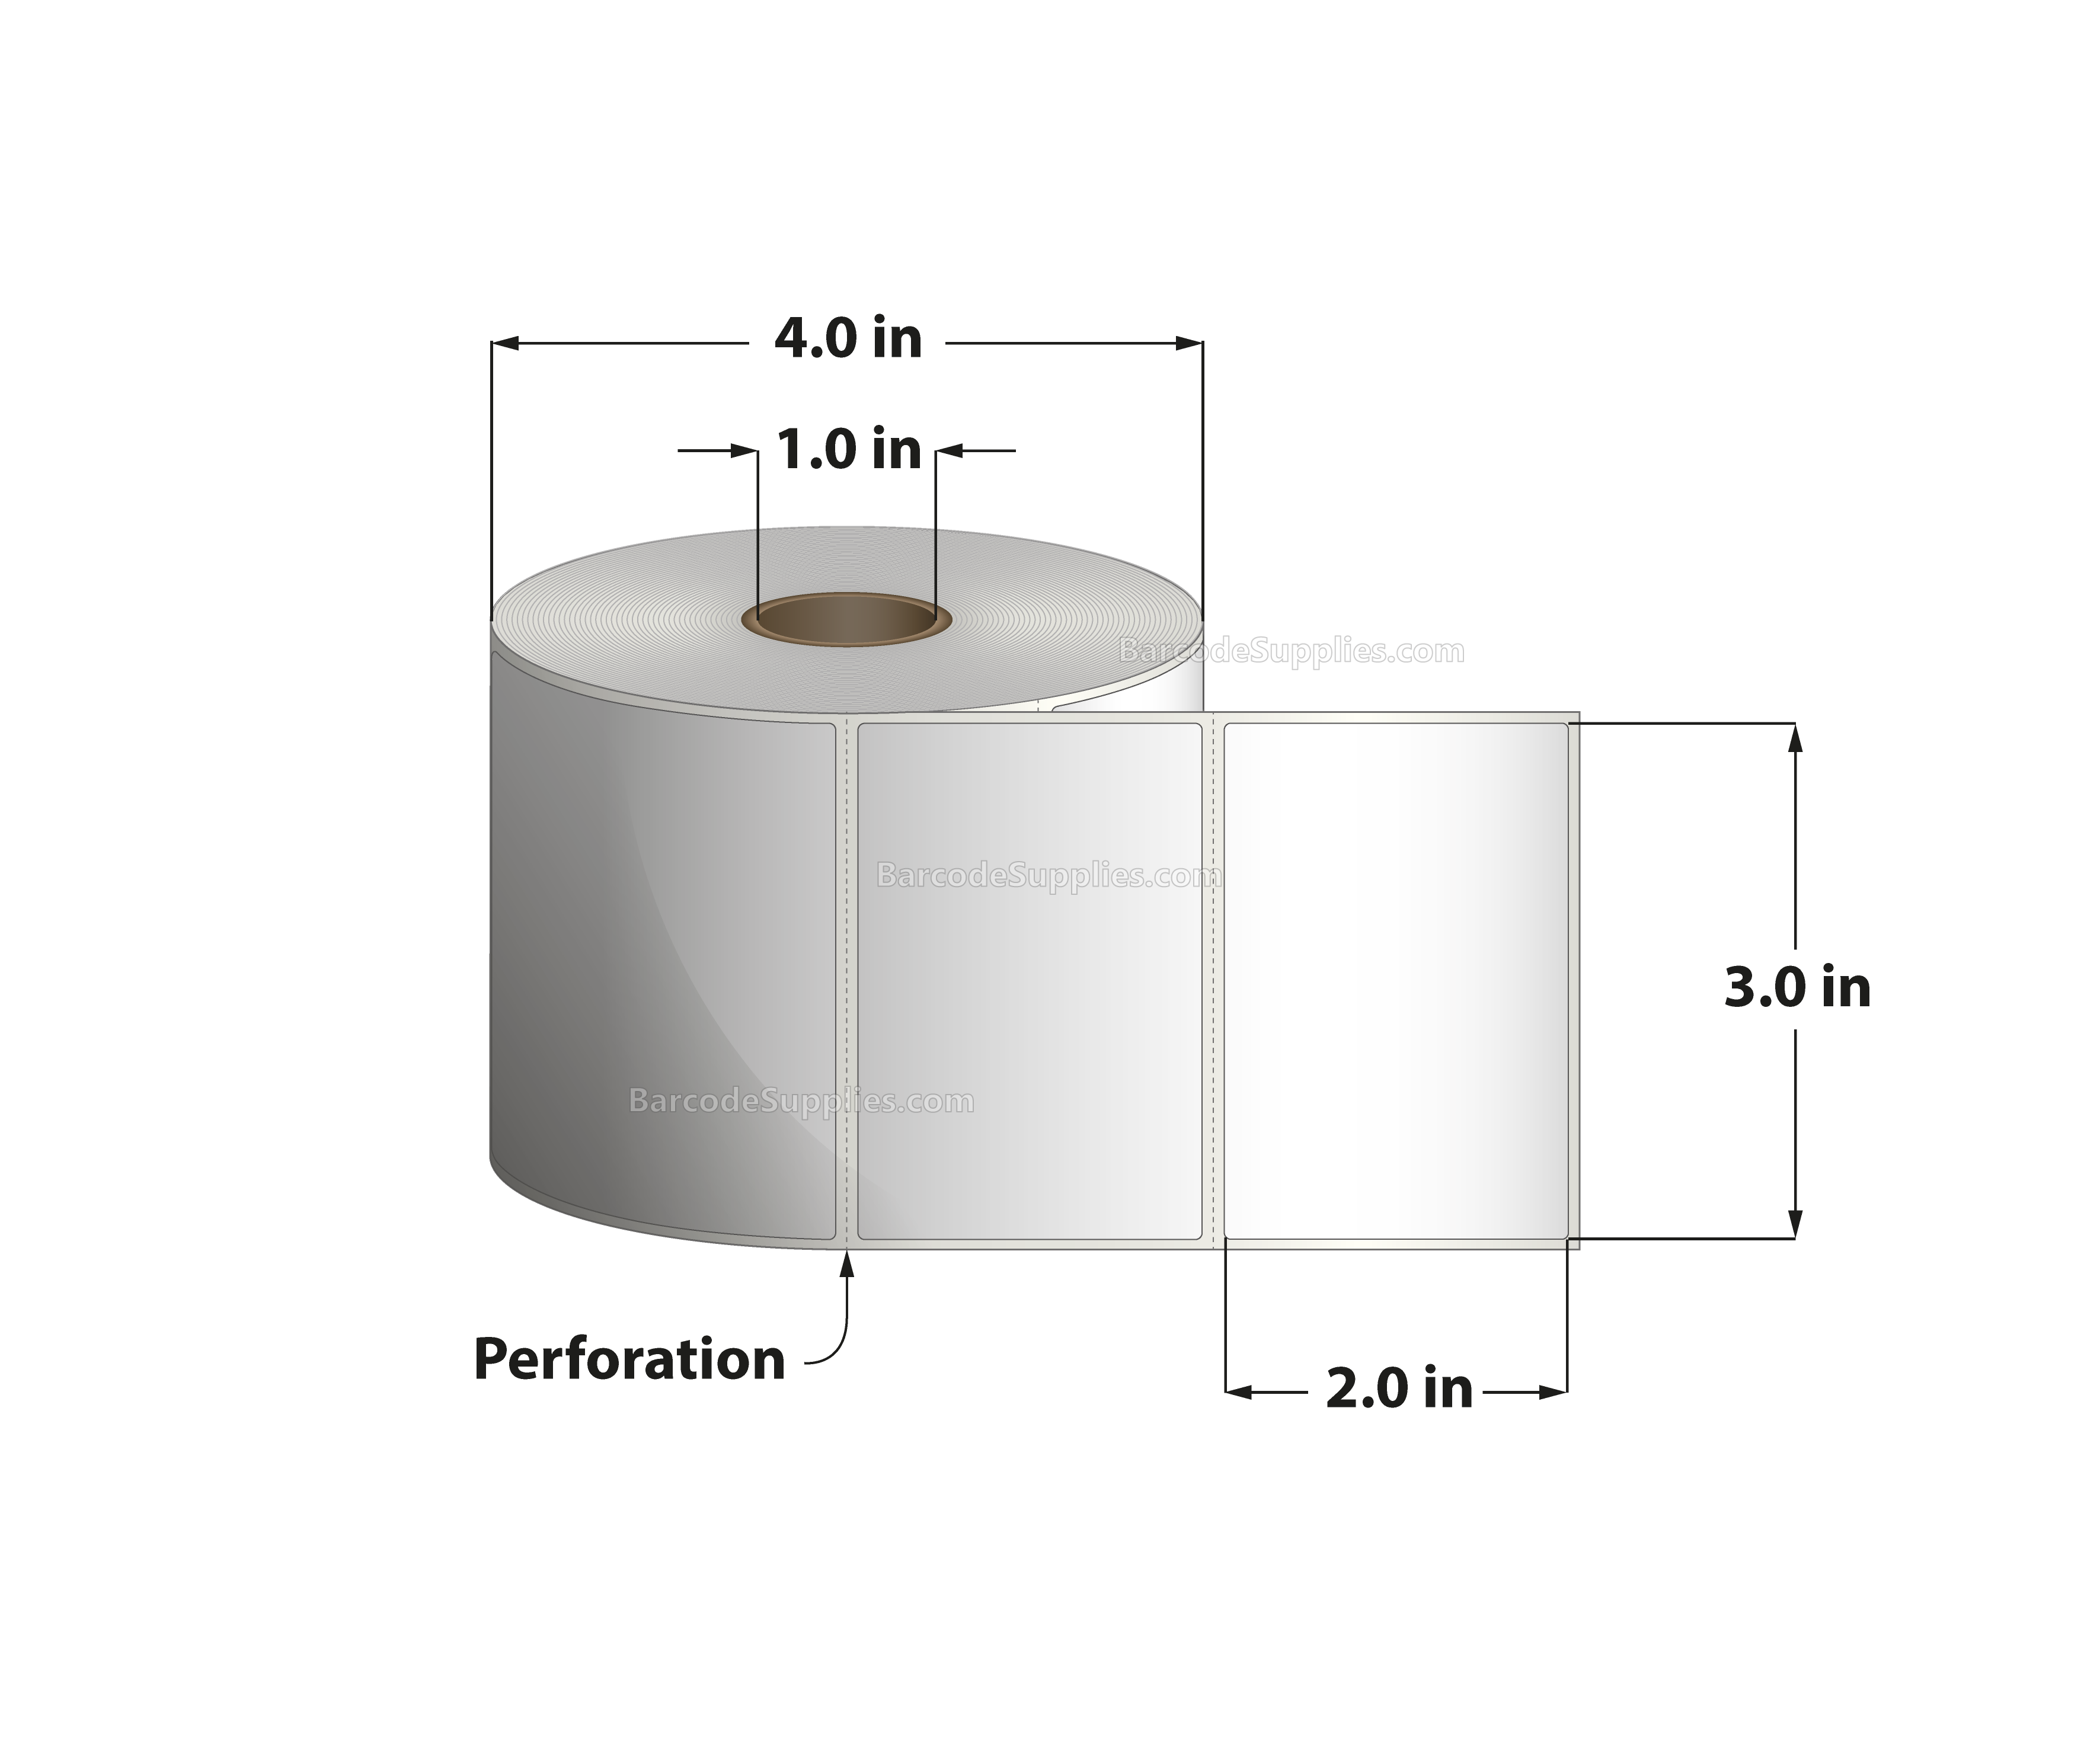 3 x 2 Direct Thermal White Labels With Acrylic Adhesive - Perforated - 735 Labels Per Roll - Carton Of 12 Rolls - 8820 Labels Total - MPN: RD-3-2-735-1 - BarcodeSource, Inc.